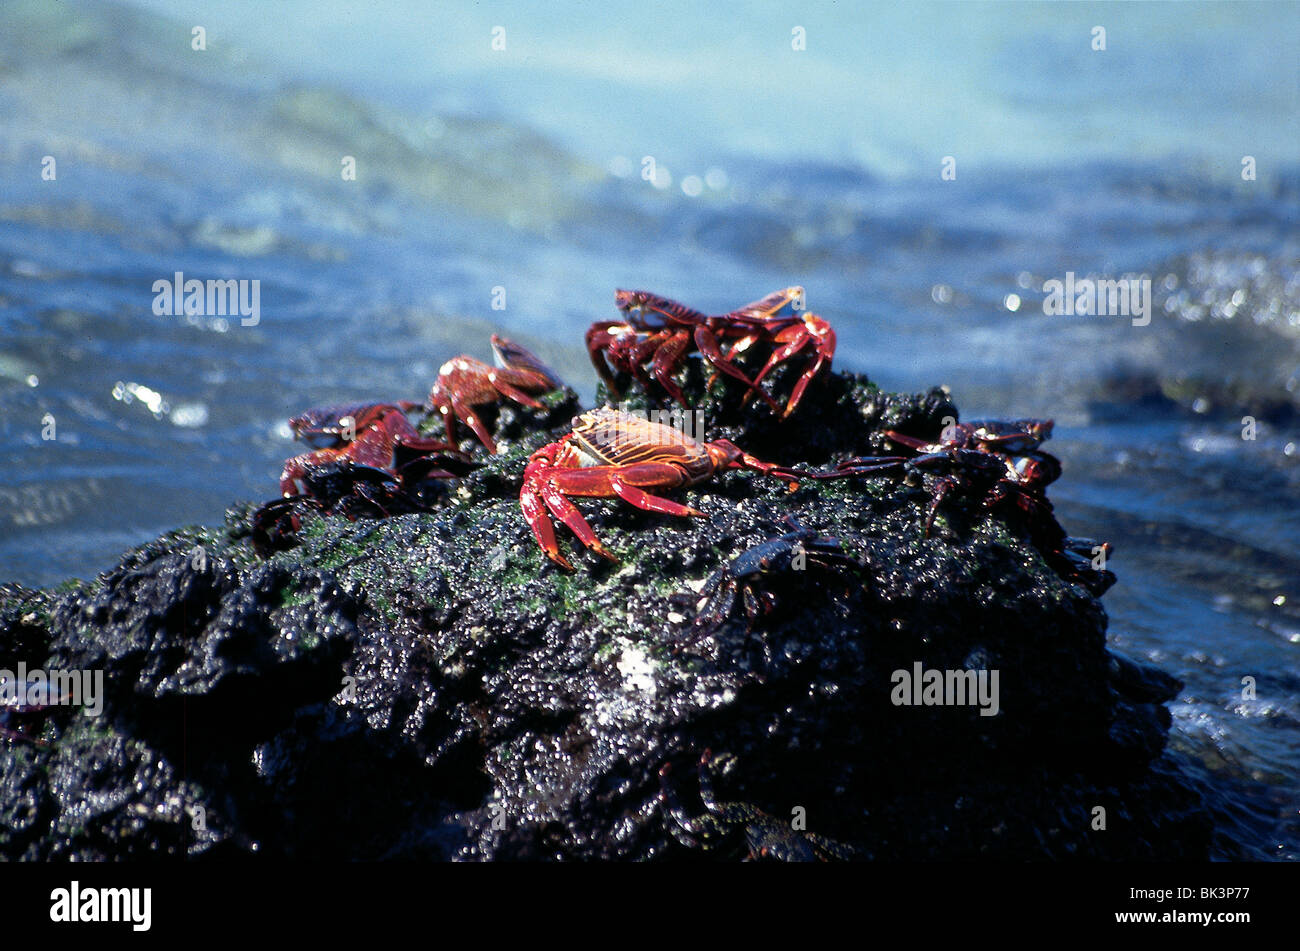 Red Rock Crabs or Sally Lightfoot Crabs crustaceans (Grapsus grapsus) on the Pacific Ocean coast of the Galapagos Islands, Ecuador, South America Stock Photo